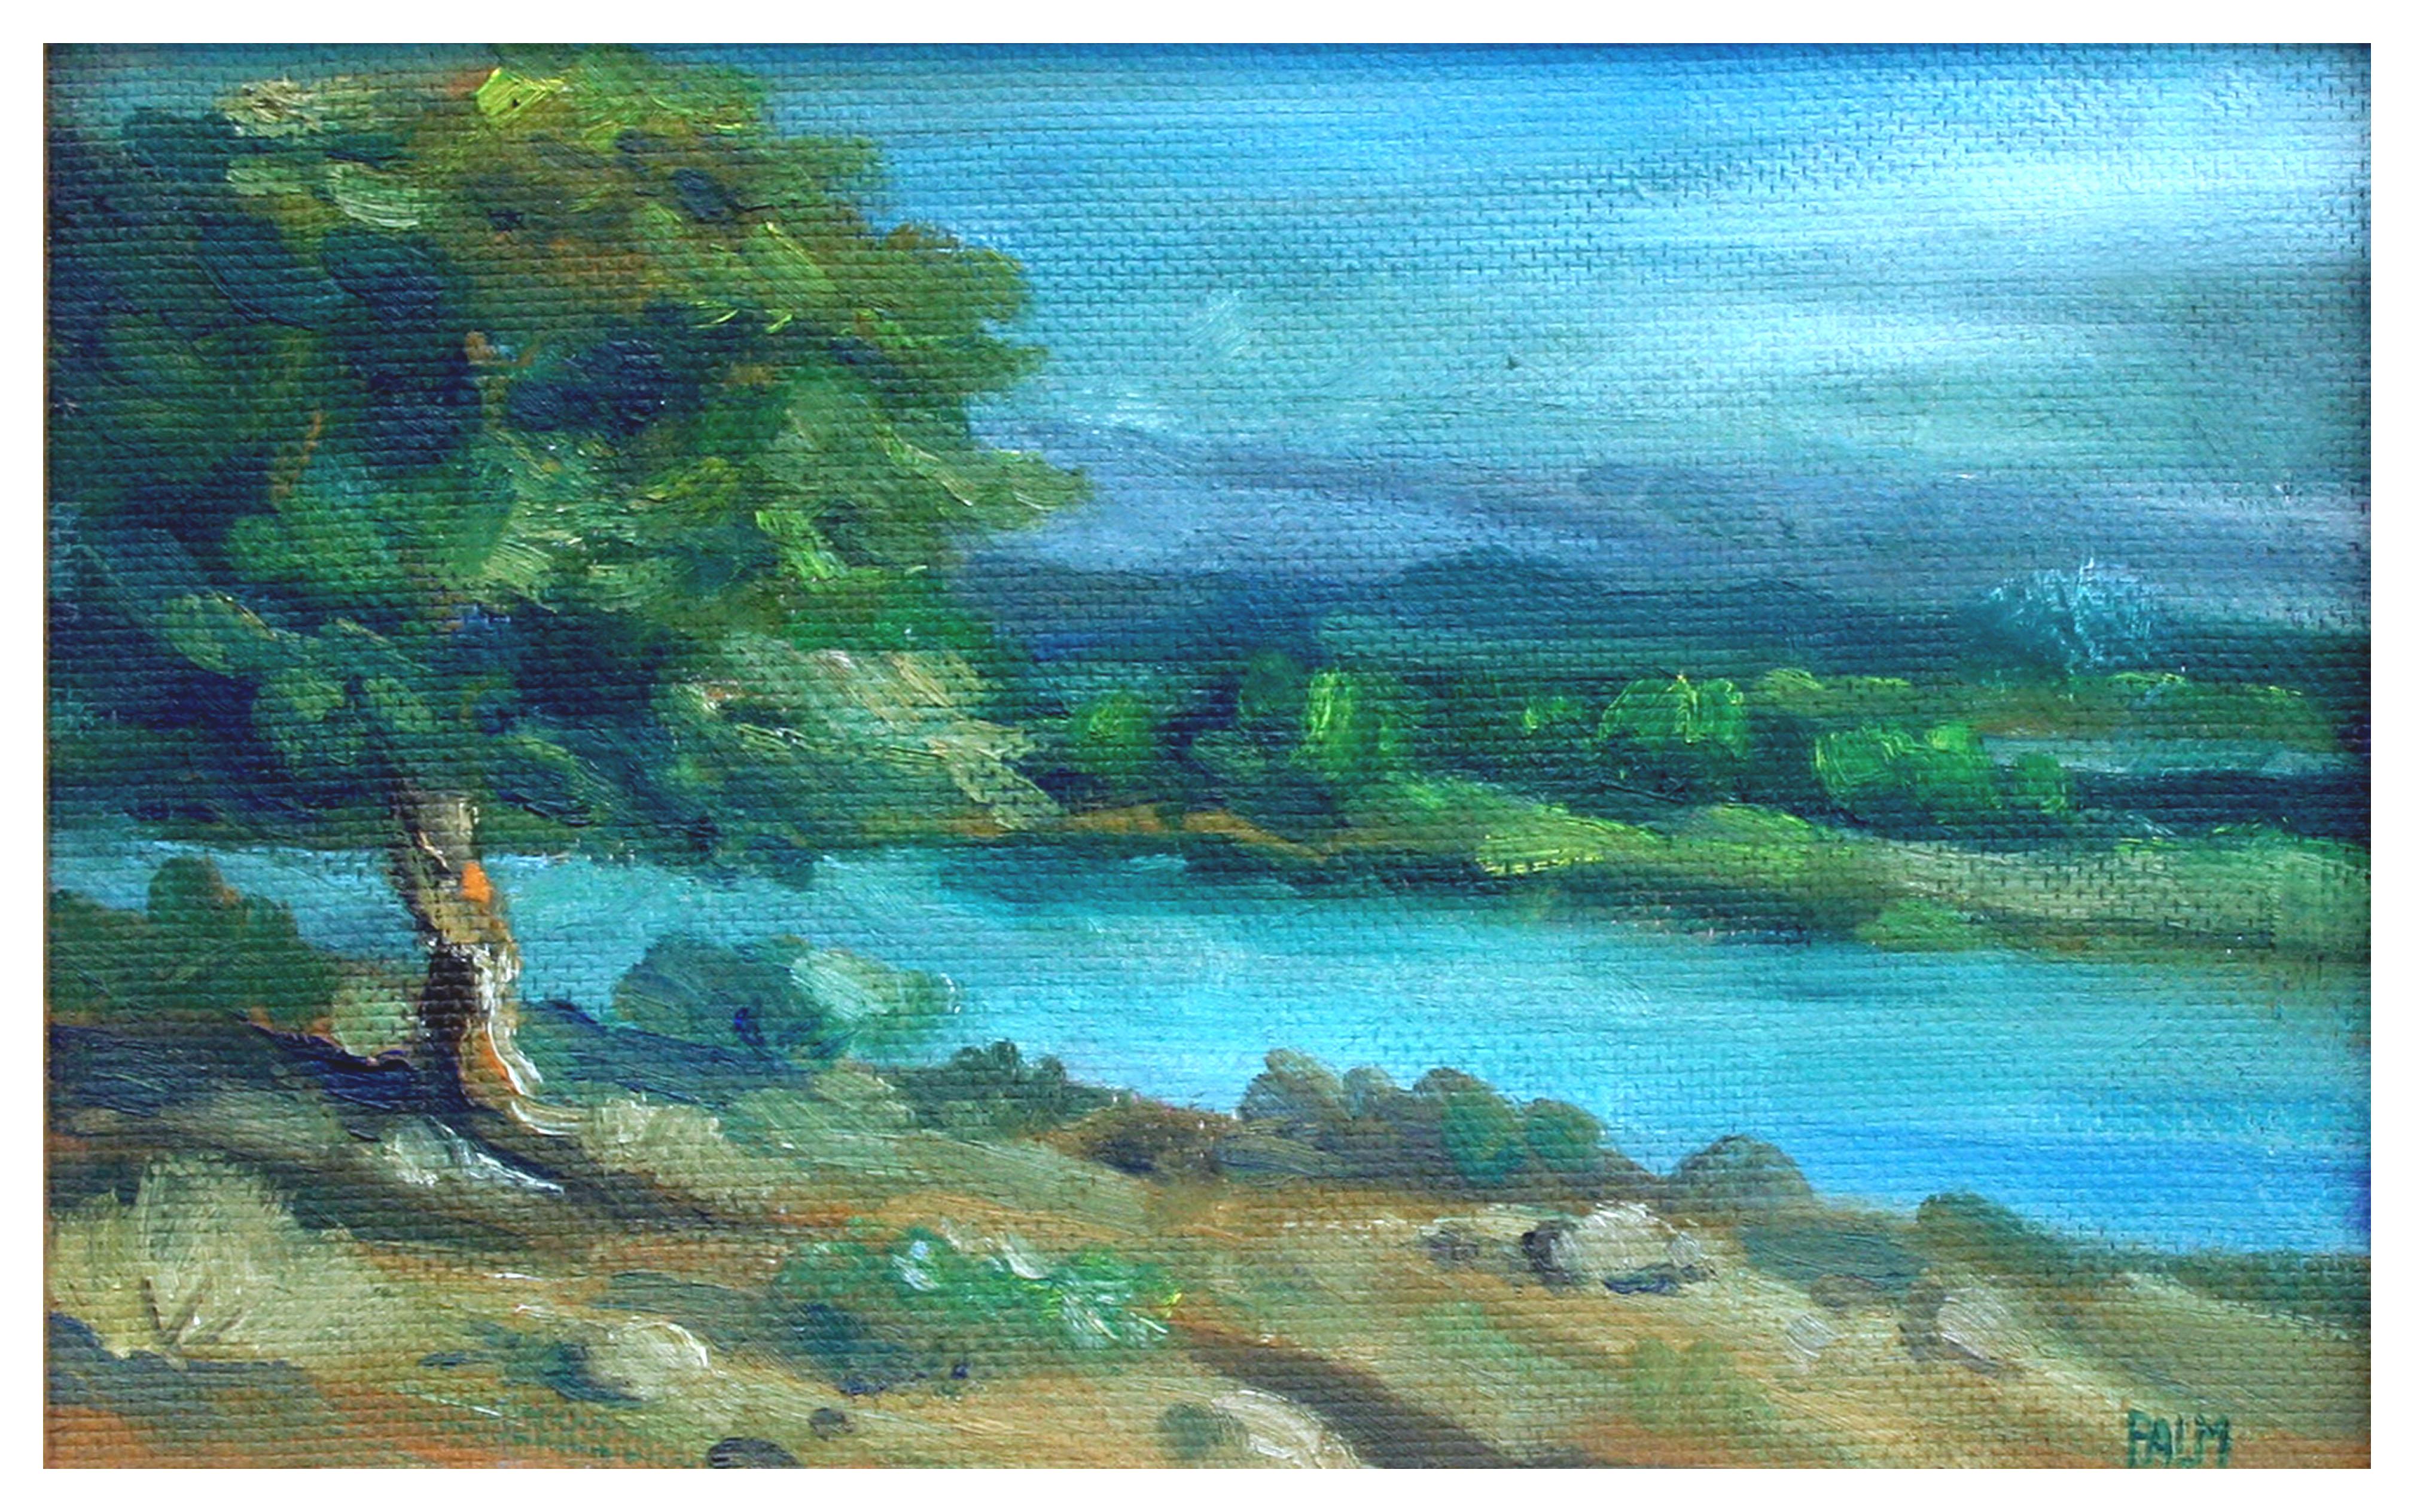 Pinto Lake, Mid Century Small-Scale Landscape with Lakeside Tree - Painting by Olaf Palm